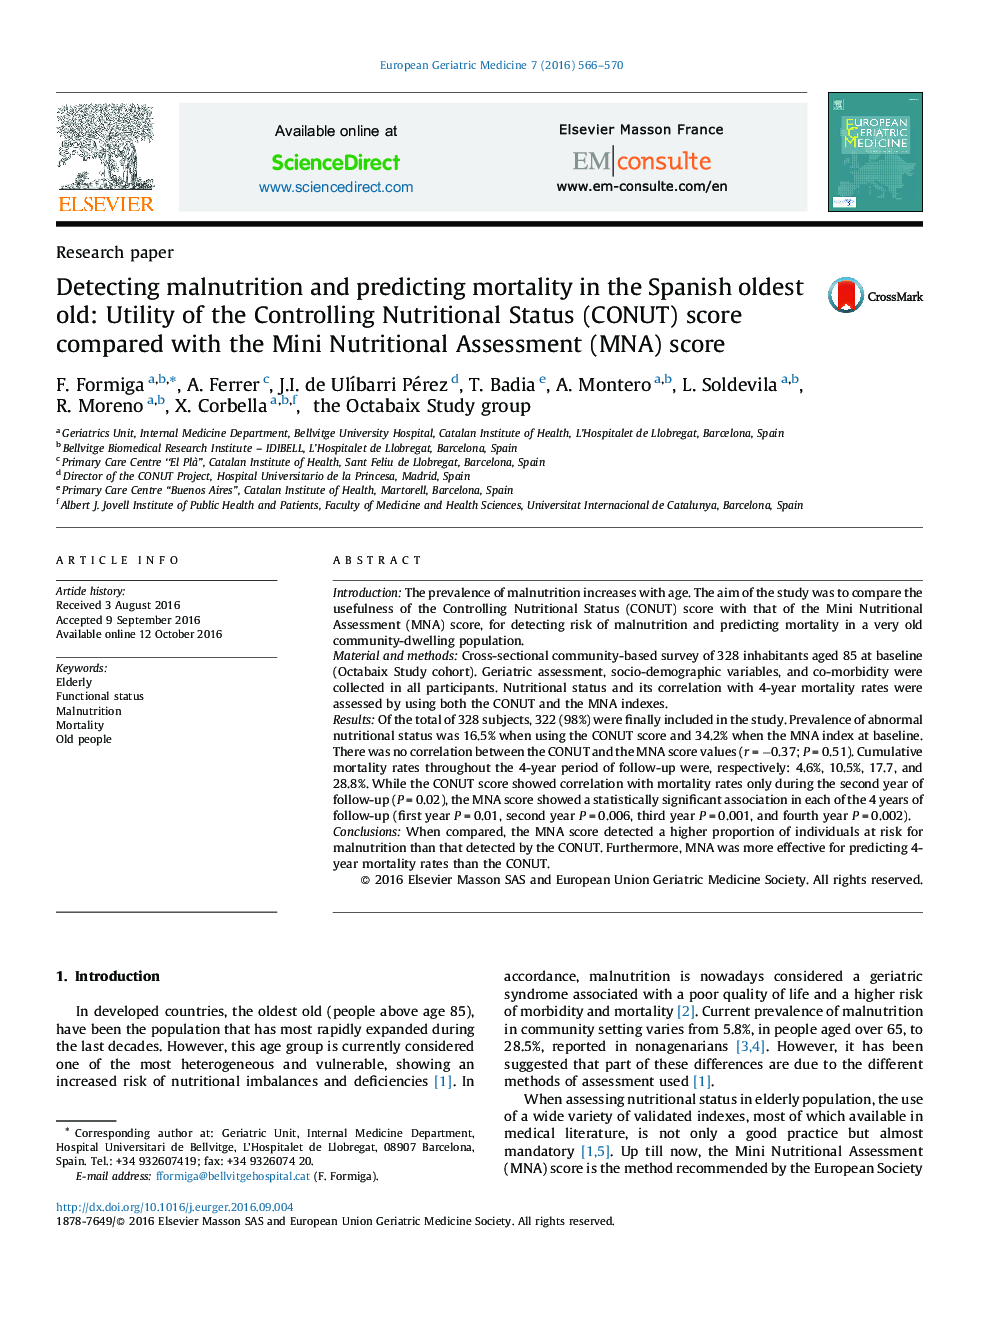 Detecting malnutrition and predicting mortality in the Spanish oldest old: Utility of the Controlling Nutritional Status (CONUT) score compared with the Mini Nutritional Assessment (MNA) score